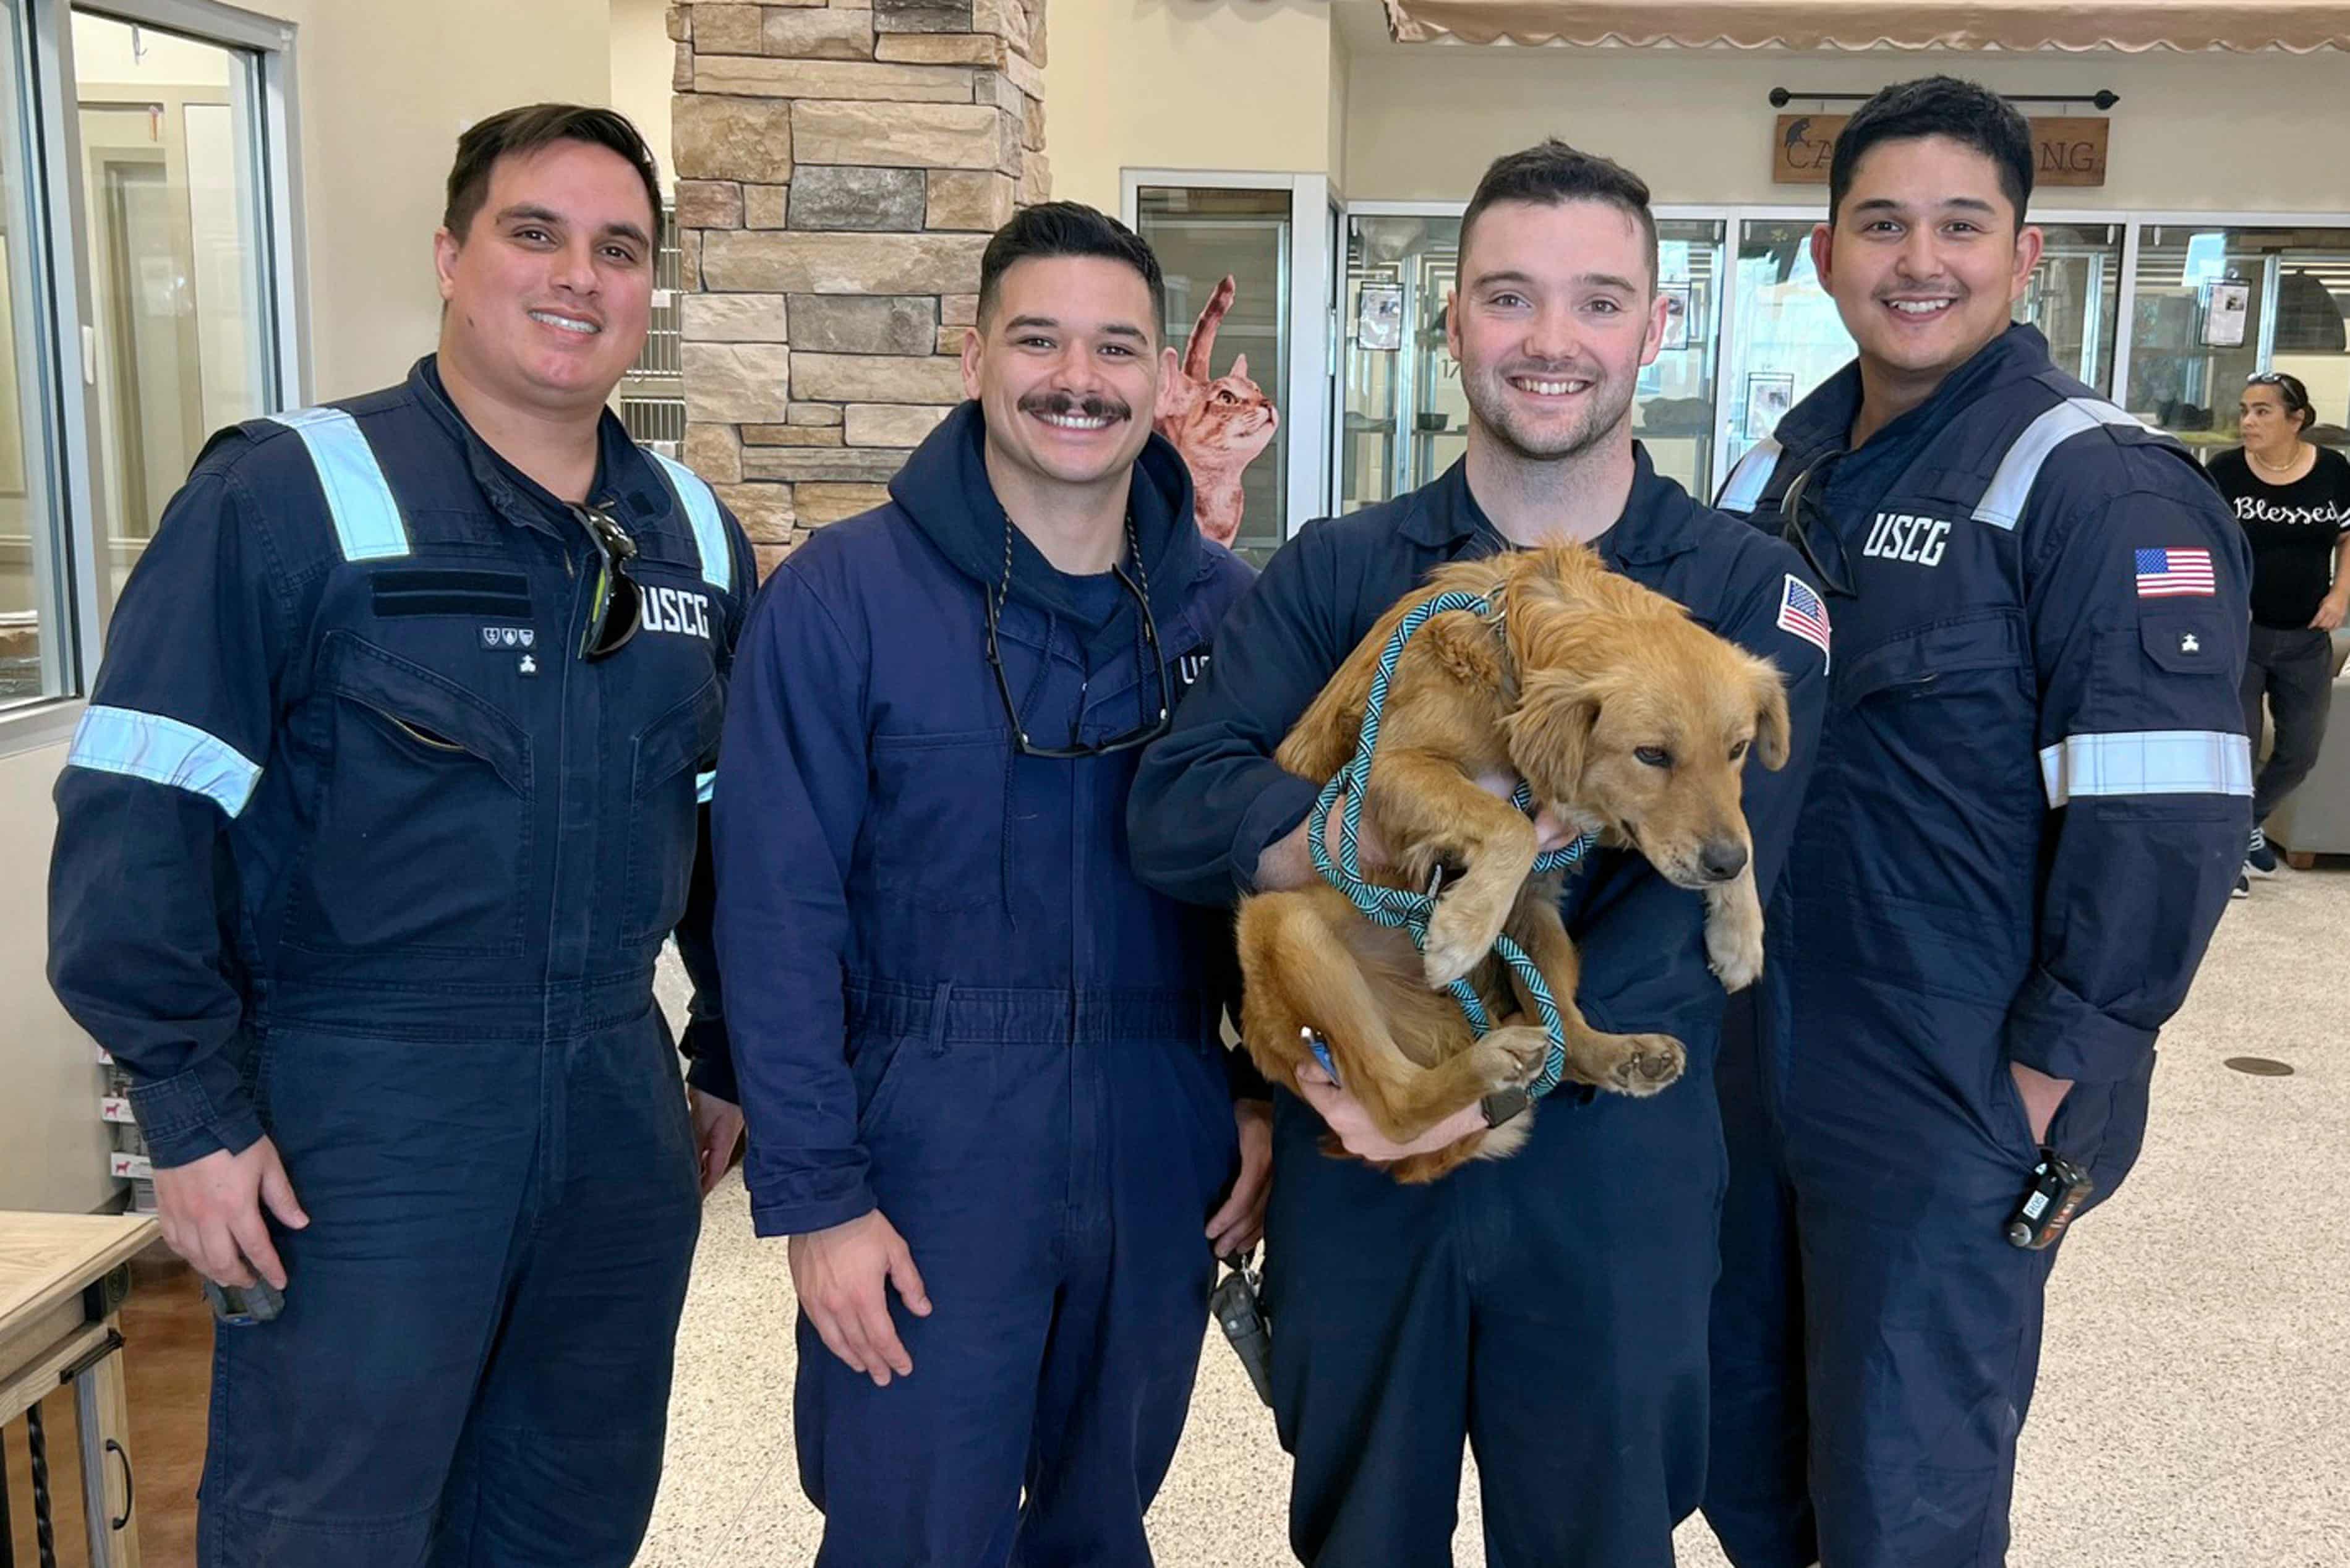 ‘It’s scratching, dude’: US Coast Guard inspectors rescue stowaway dog from shipping container (theguardian.com)